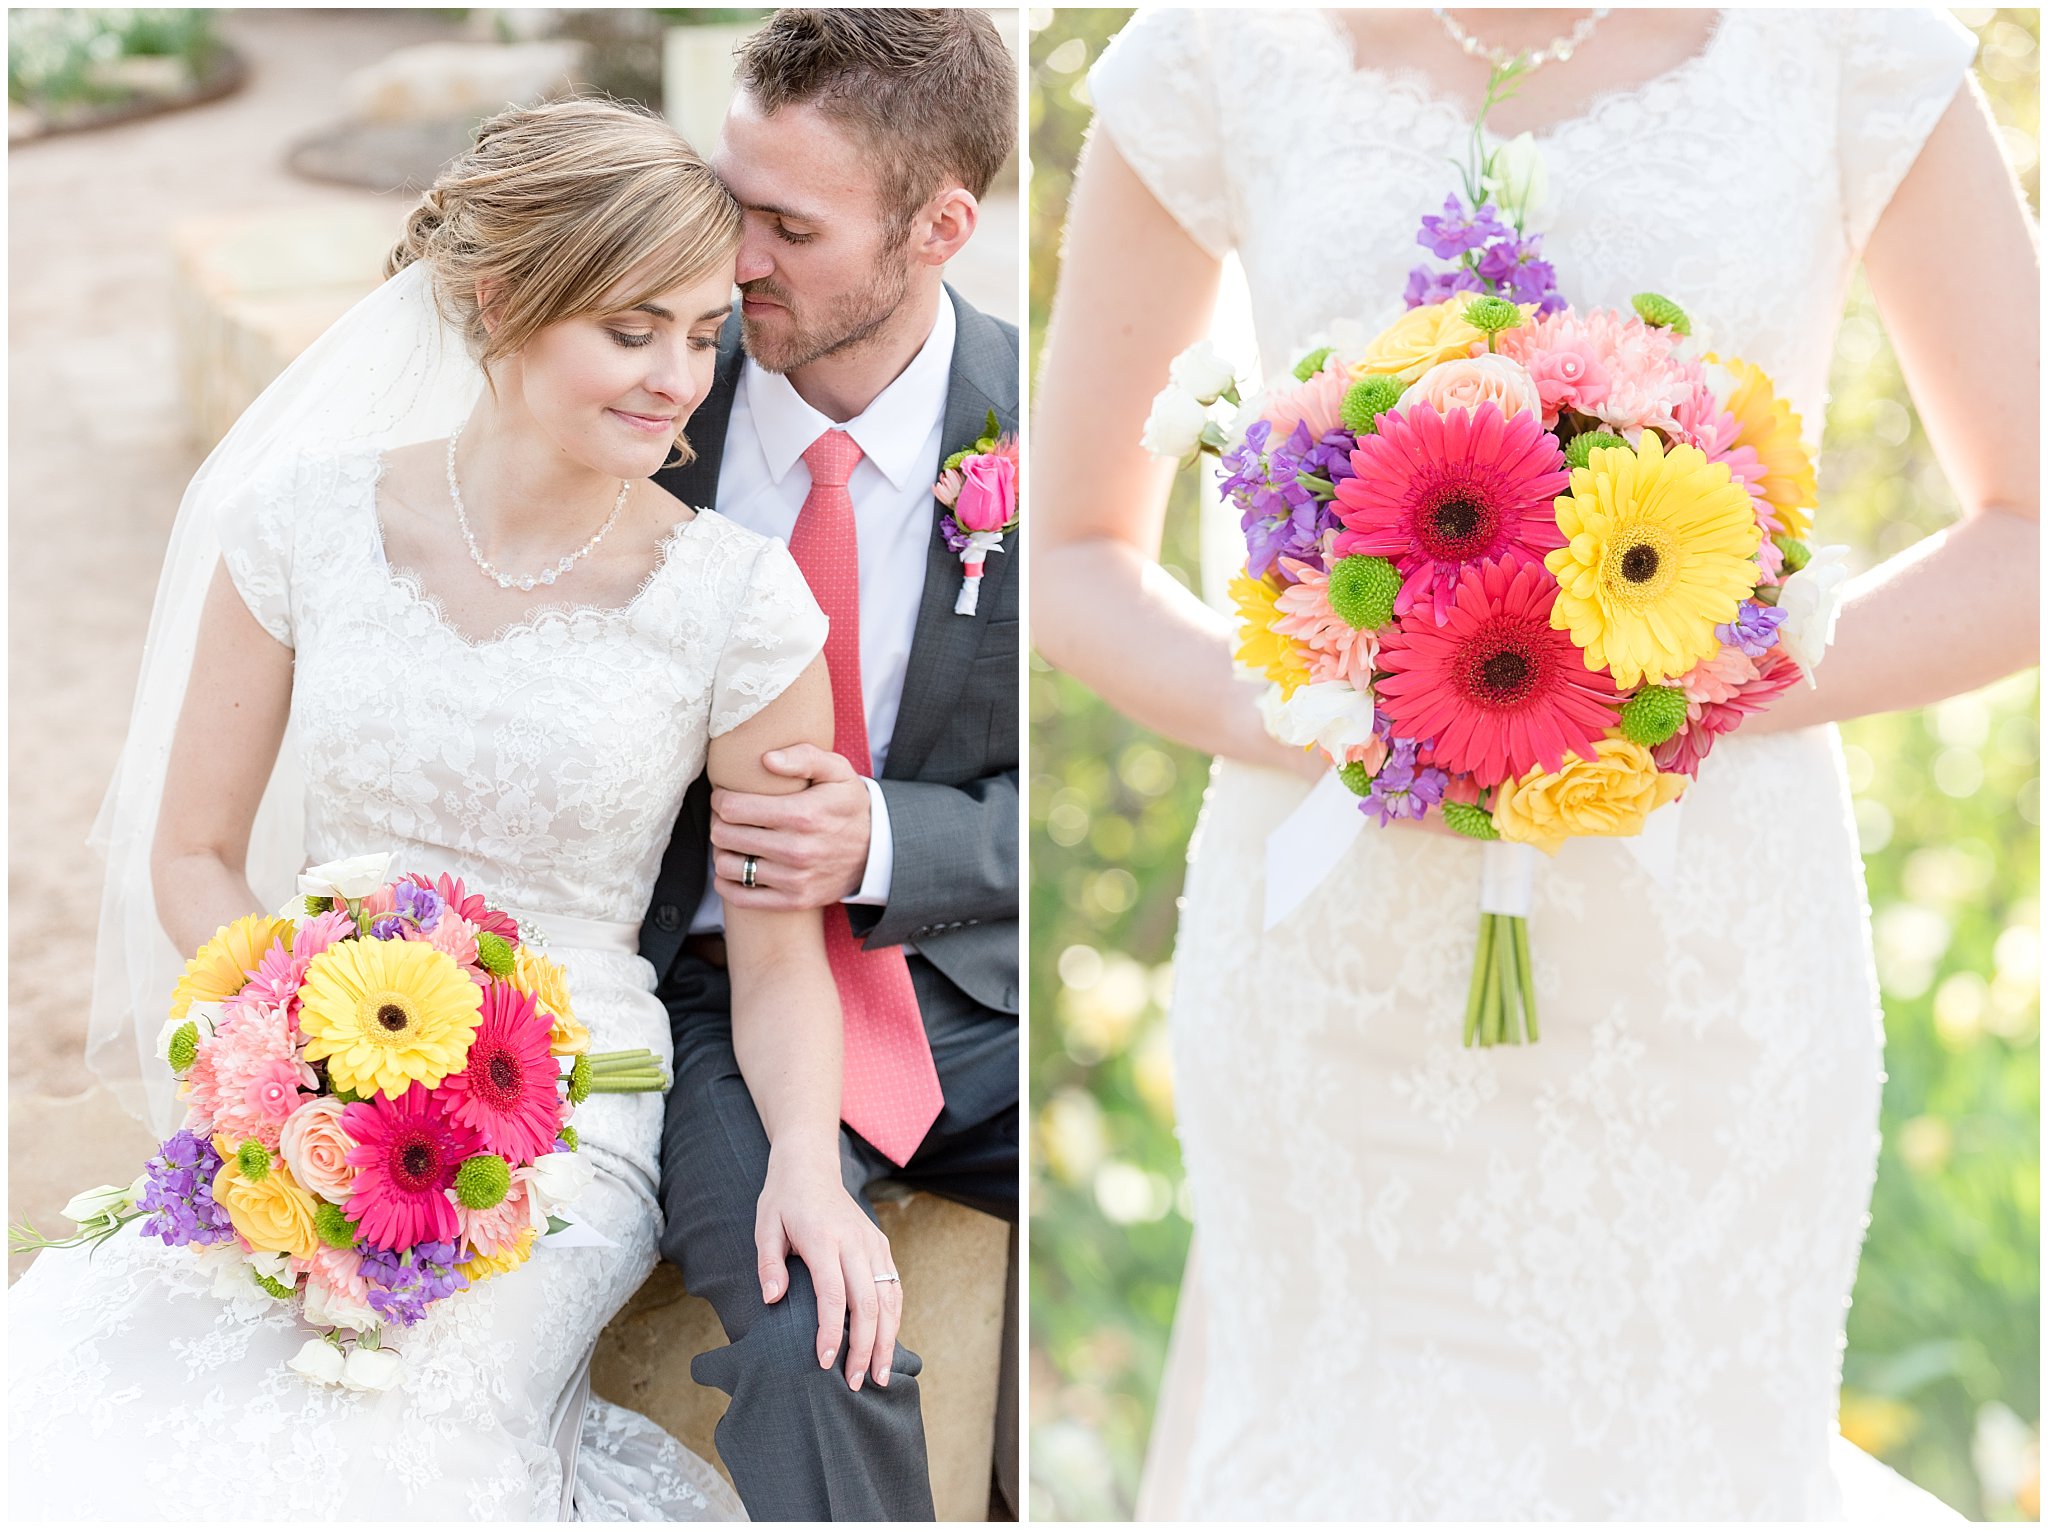 Thanksgiving Point Wedding | Spring Bride and Groom portraits | Garden Wedding Photography | Bright colored bouquet